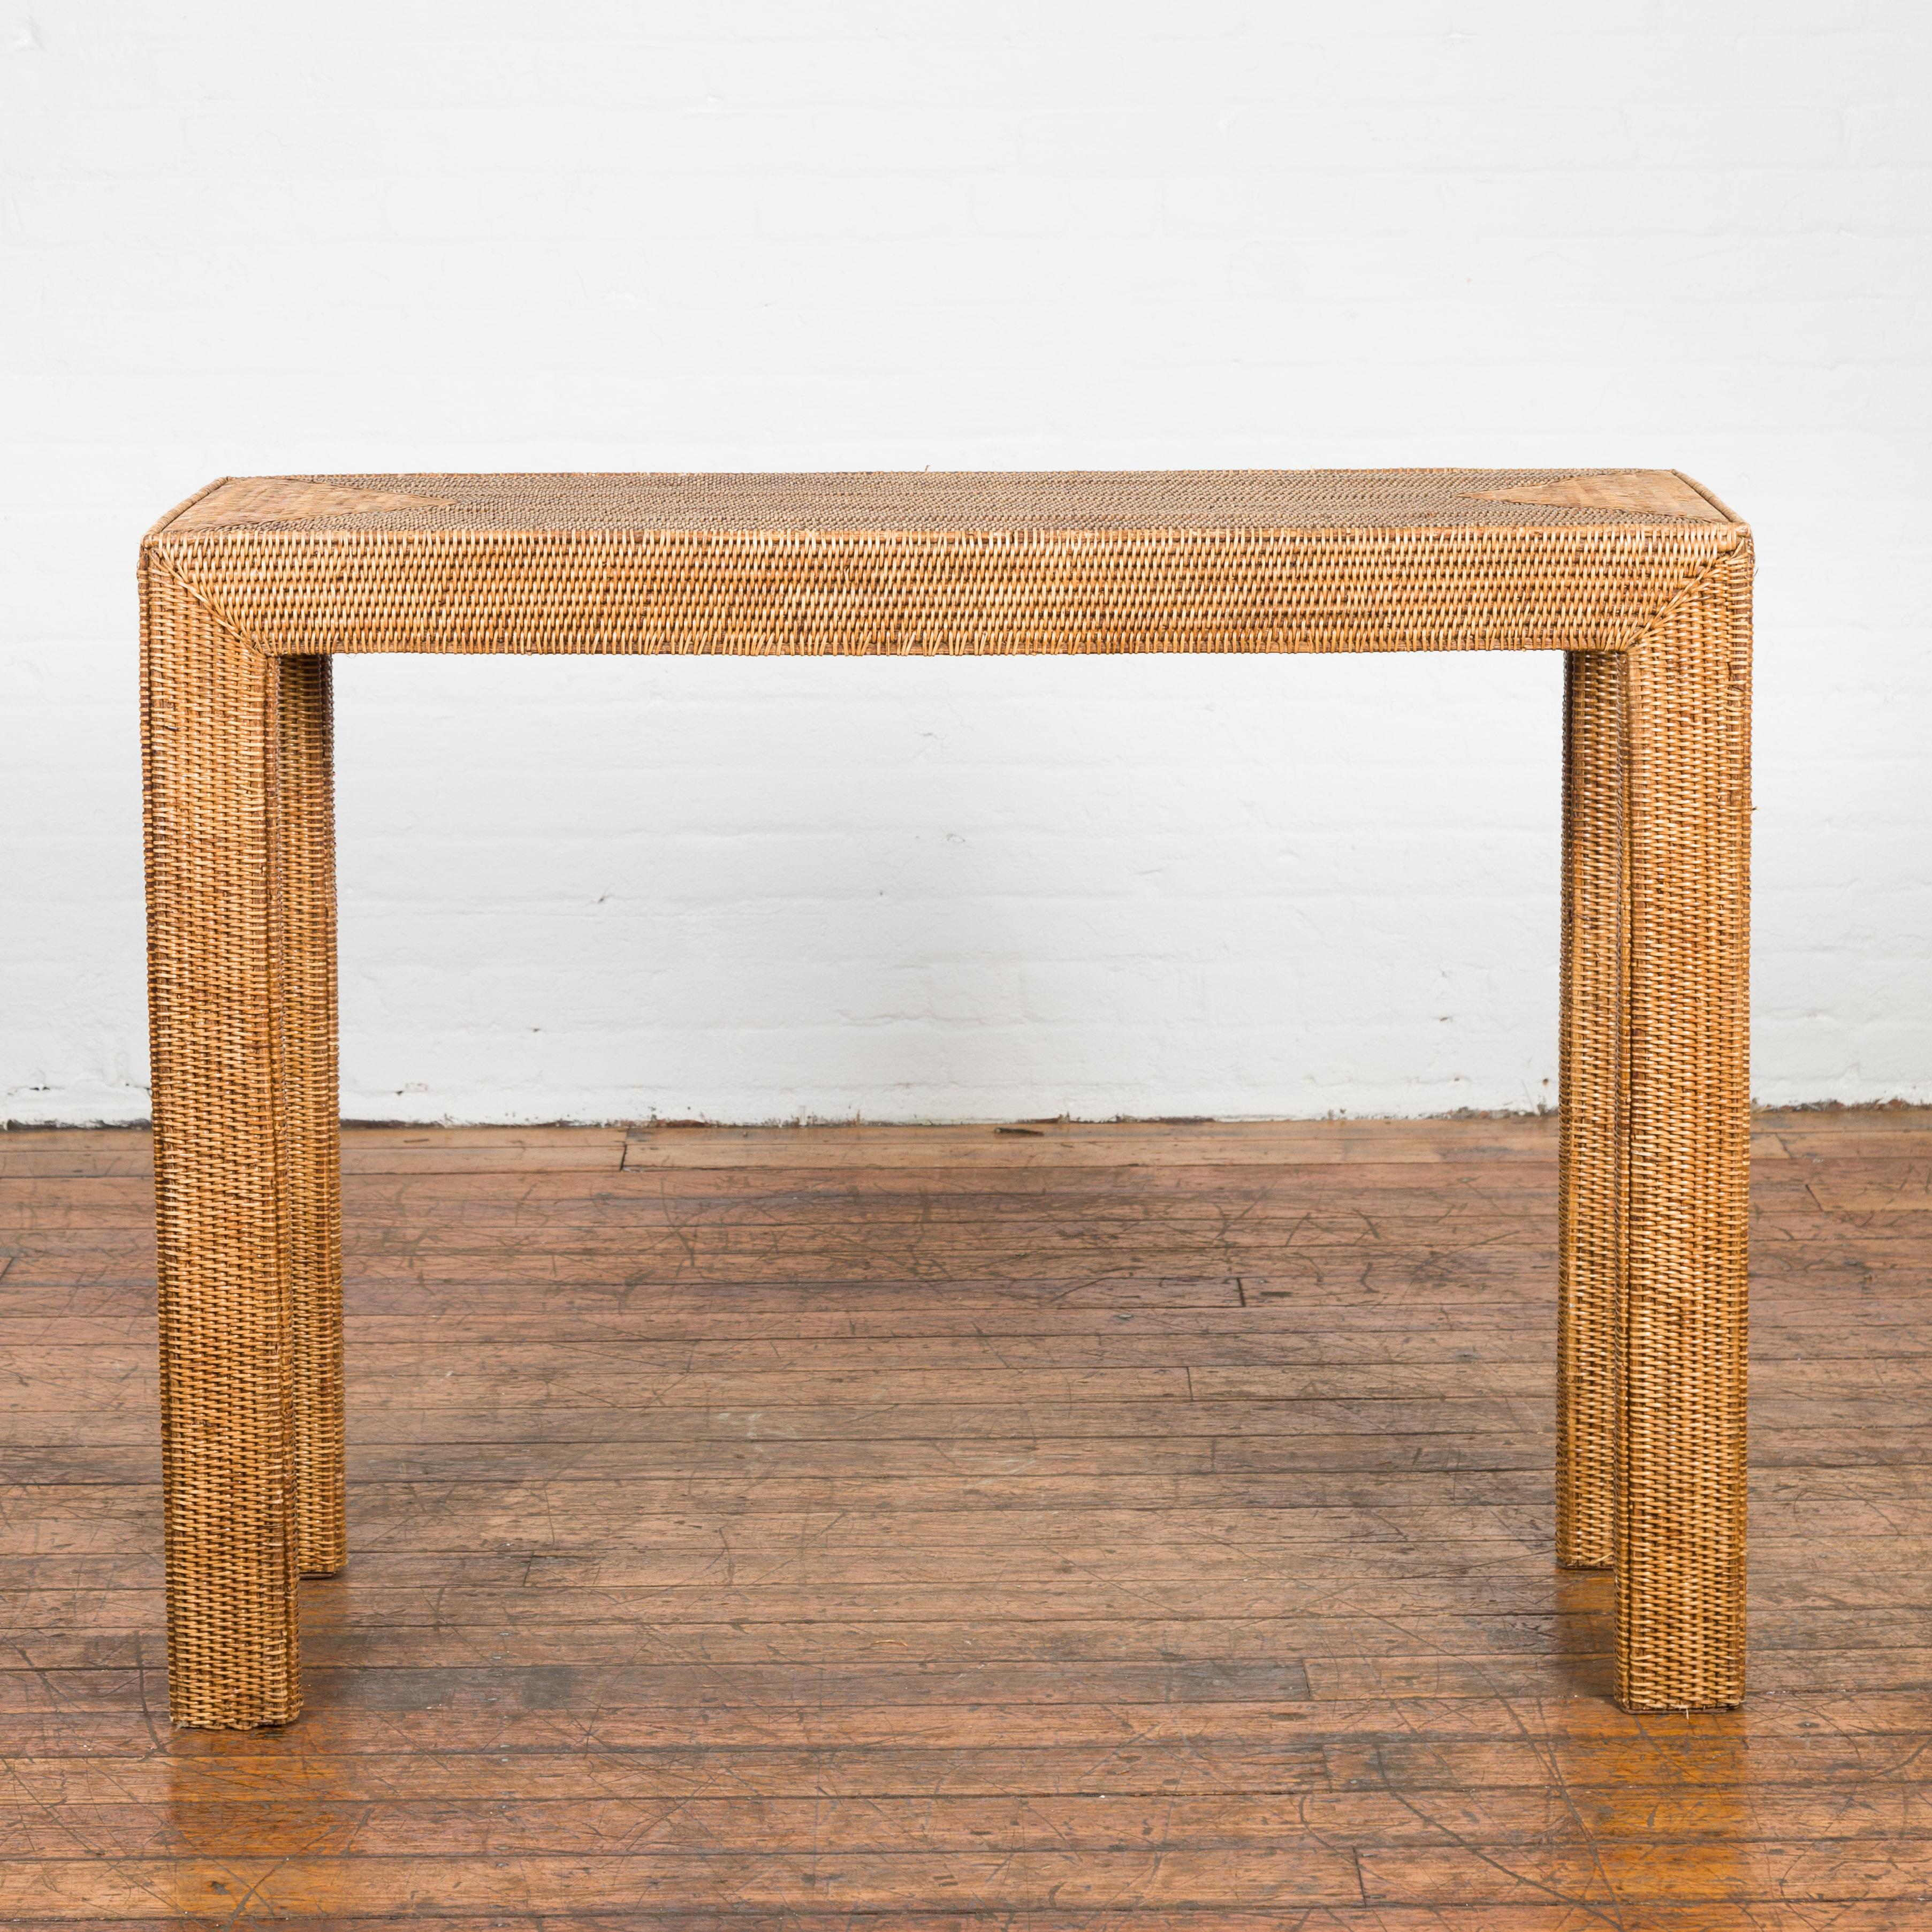 Midcentury Style Woven Rattan Console Table from the Mid-20th Century, with straight legs and triangular patterns. Created in Burma during the midcentury period, this console table charms us with its simple silhouette and rustic character. The table